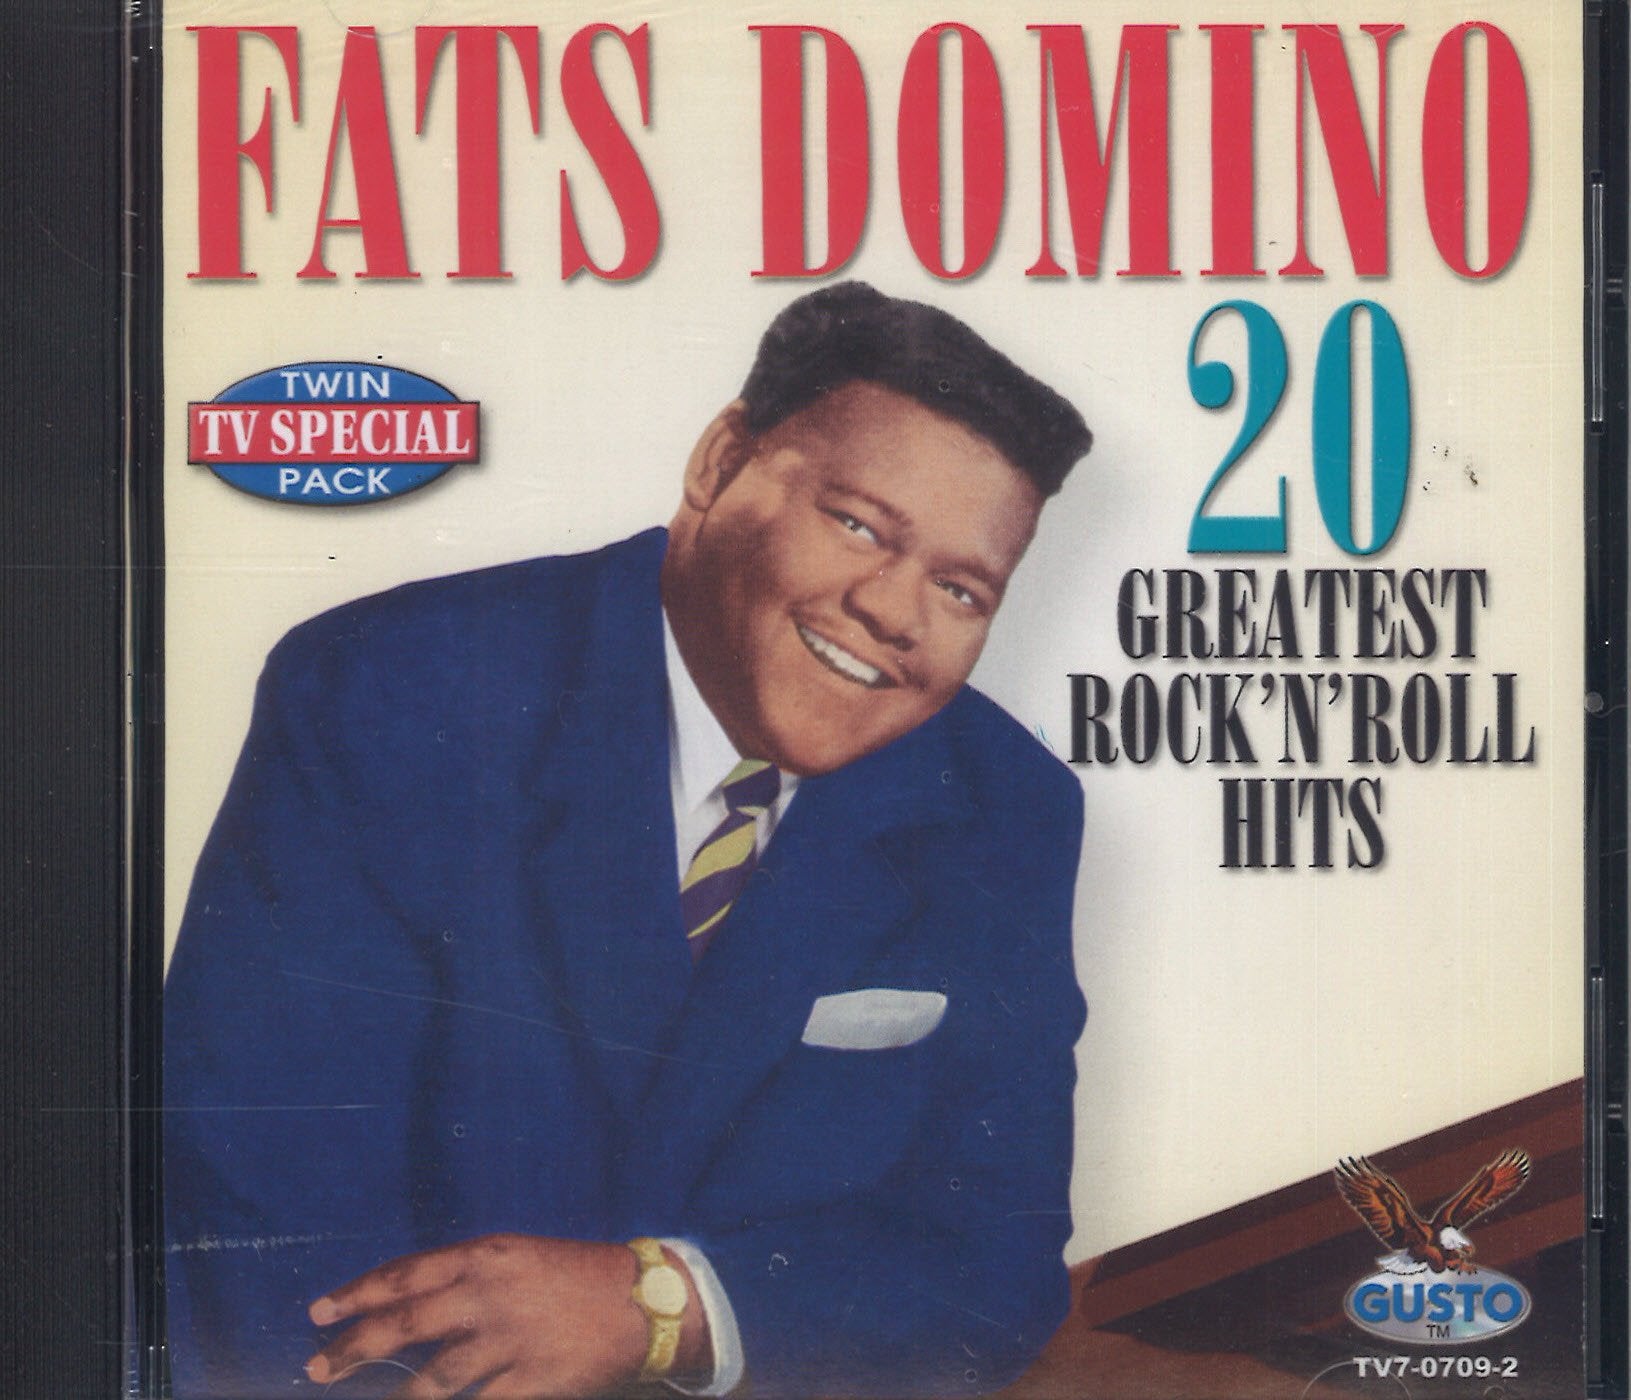 Fats Domino 20 Greatest Rock N Roll Hits